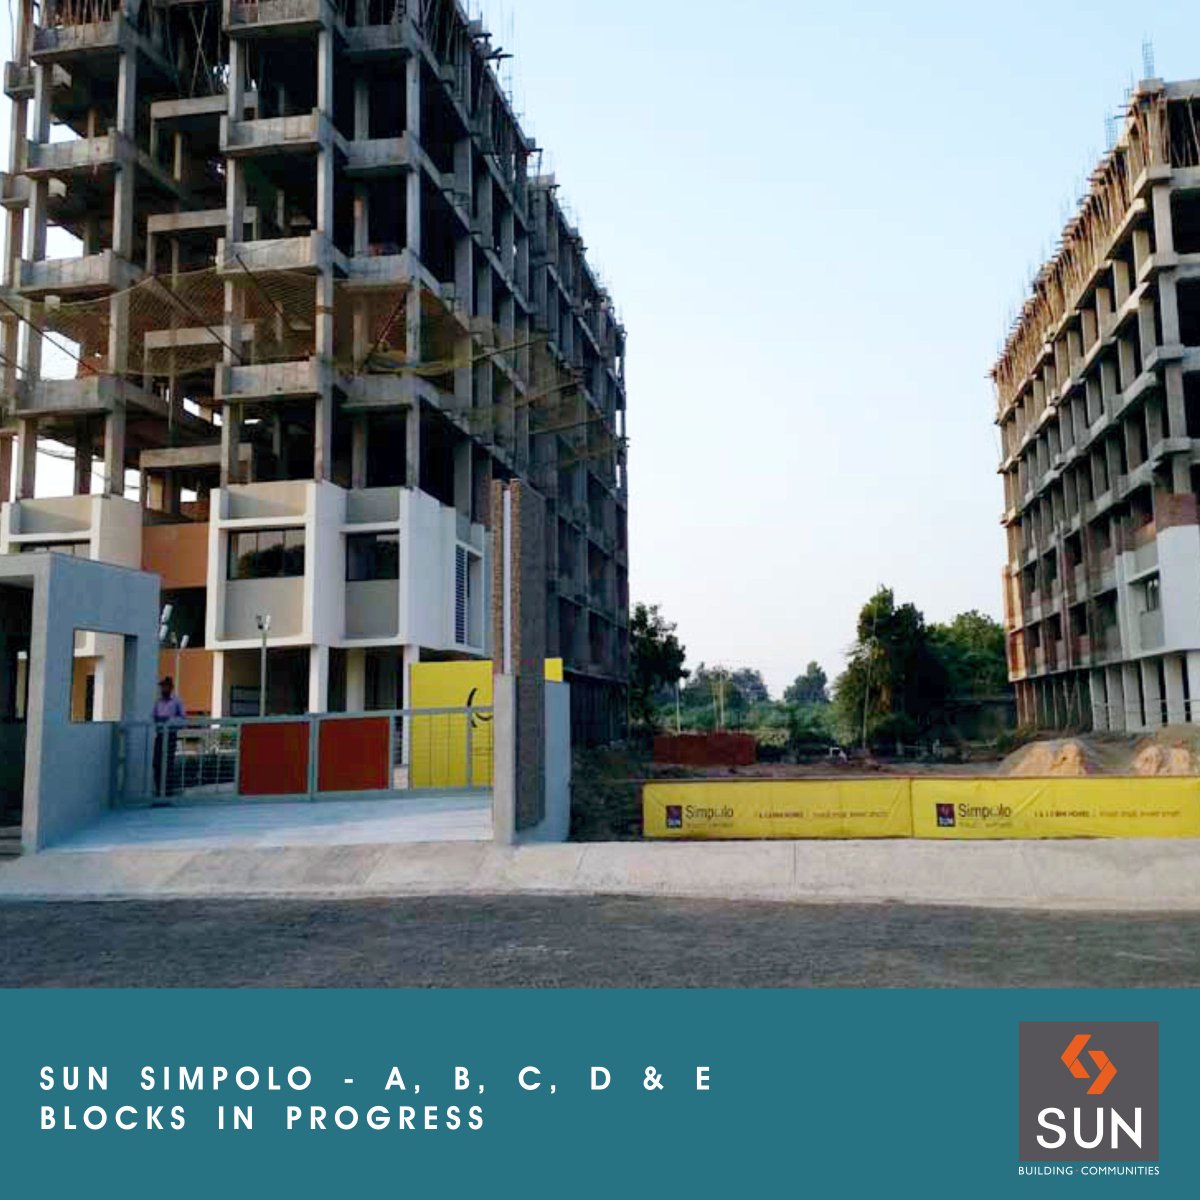 Sun Simpolo's site is revving up with rapid construction work. Be ready to witness Project Happiness soon! https://t.co/bKqvs3BrIB